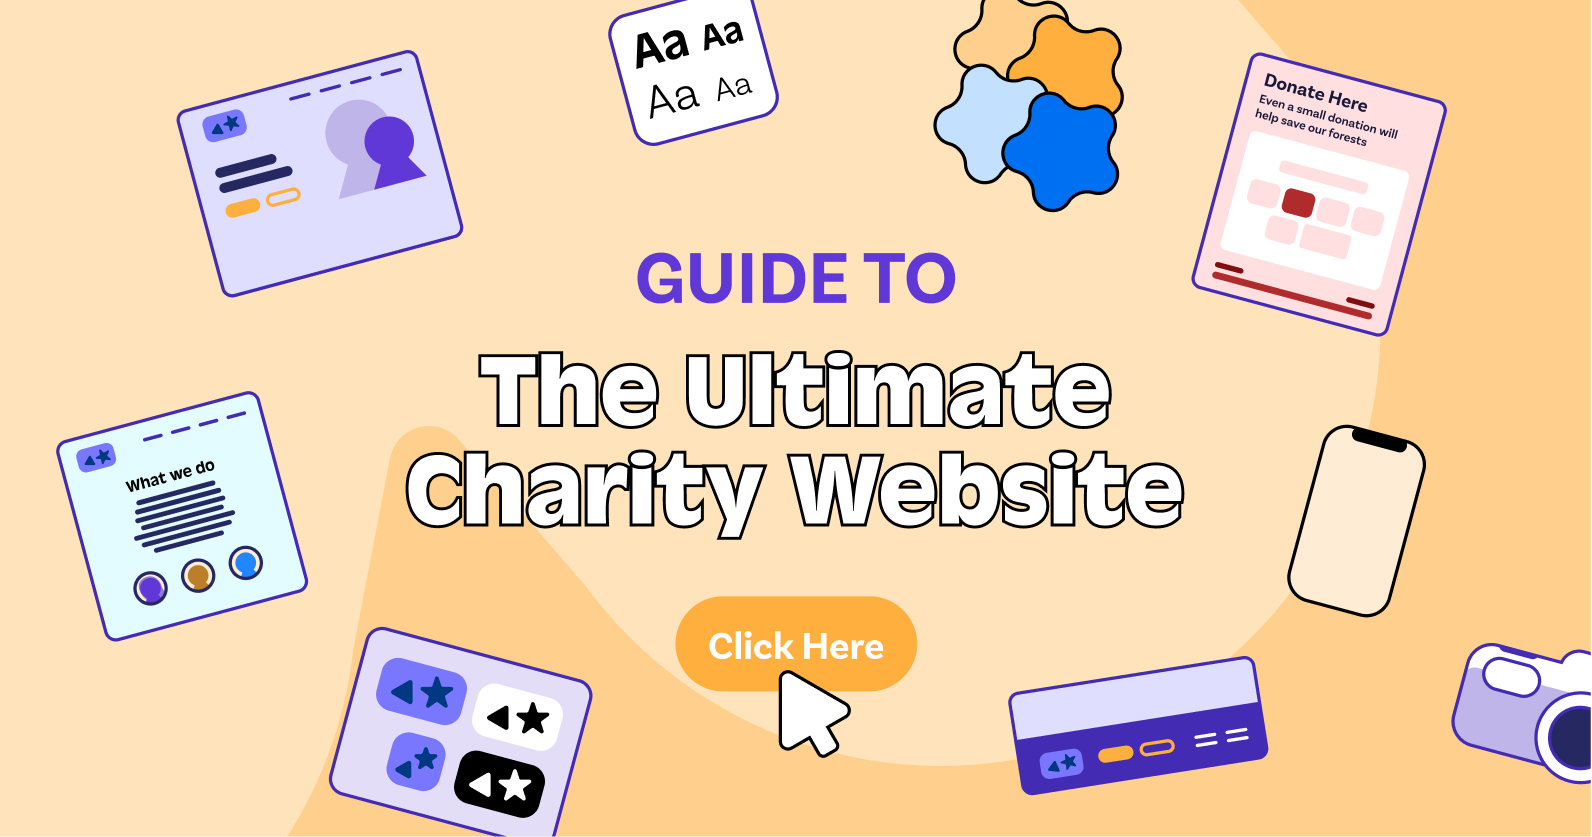 Charity Digital - Topics - The ultimate guide to email marketing